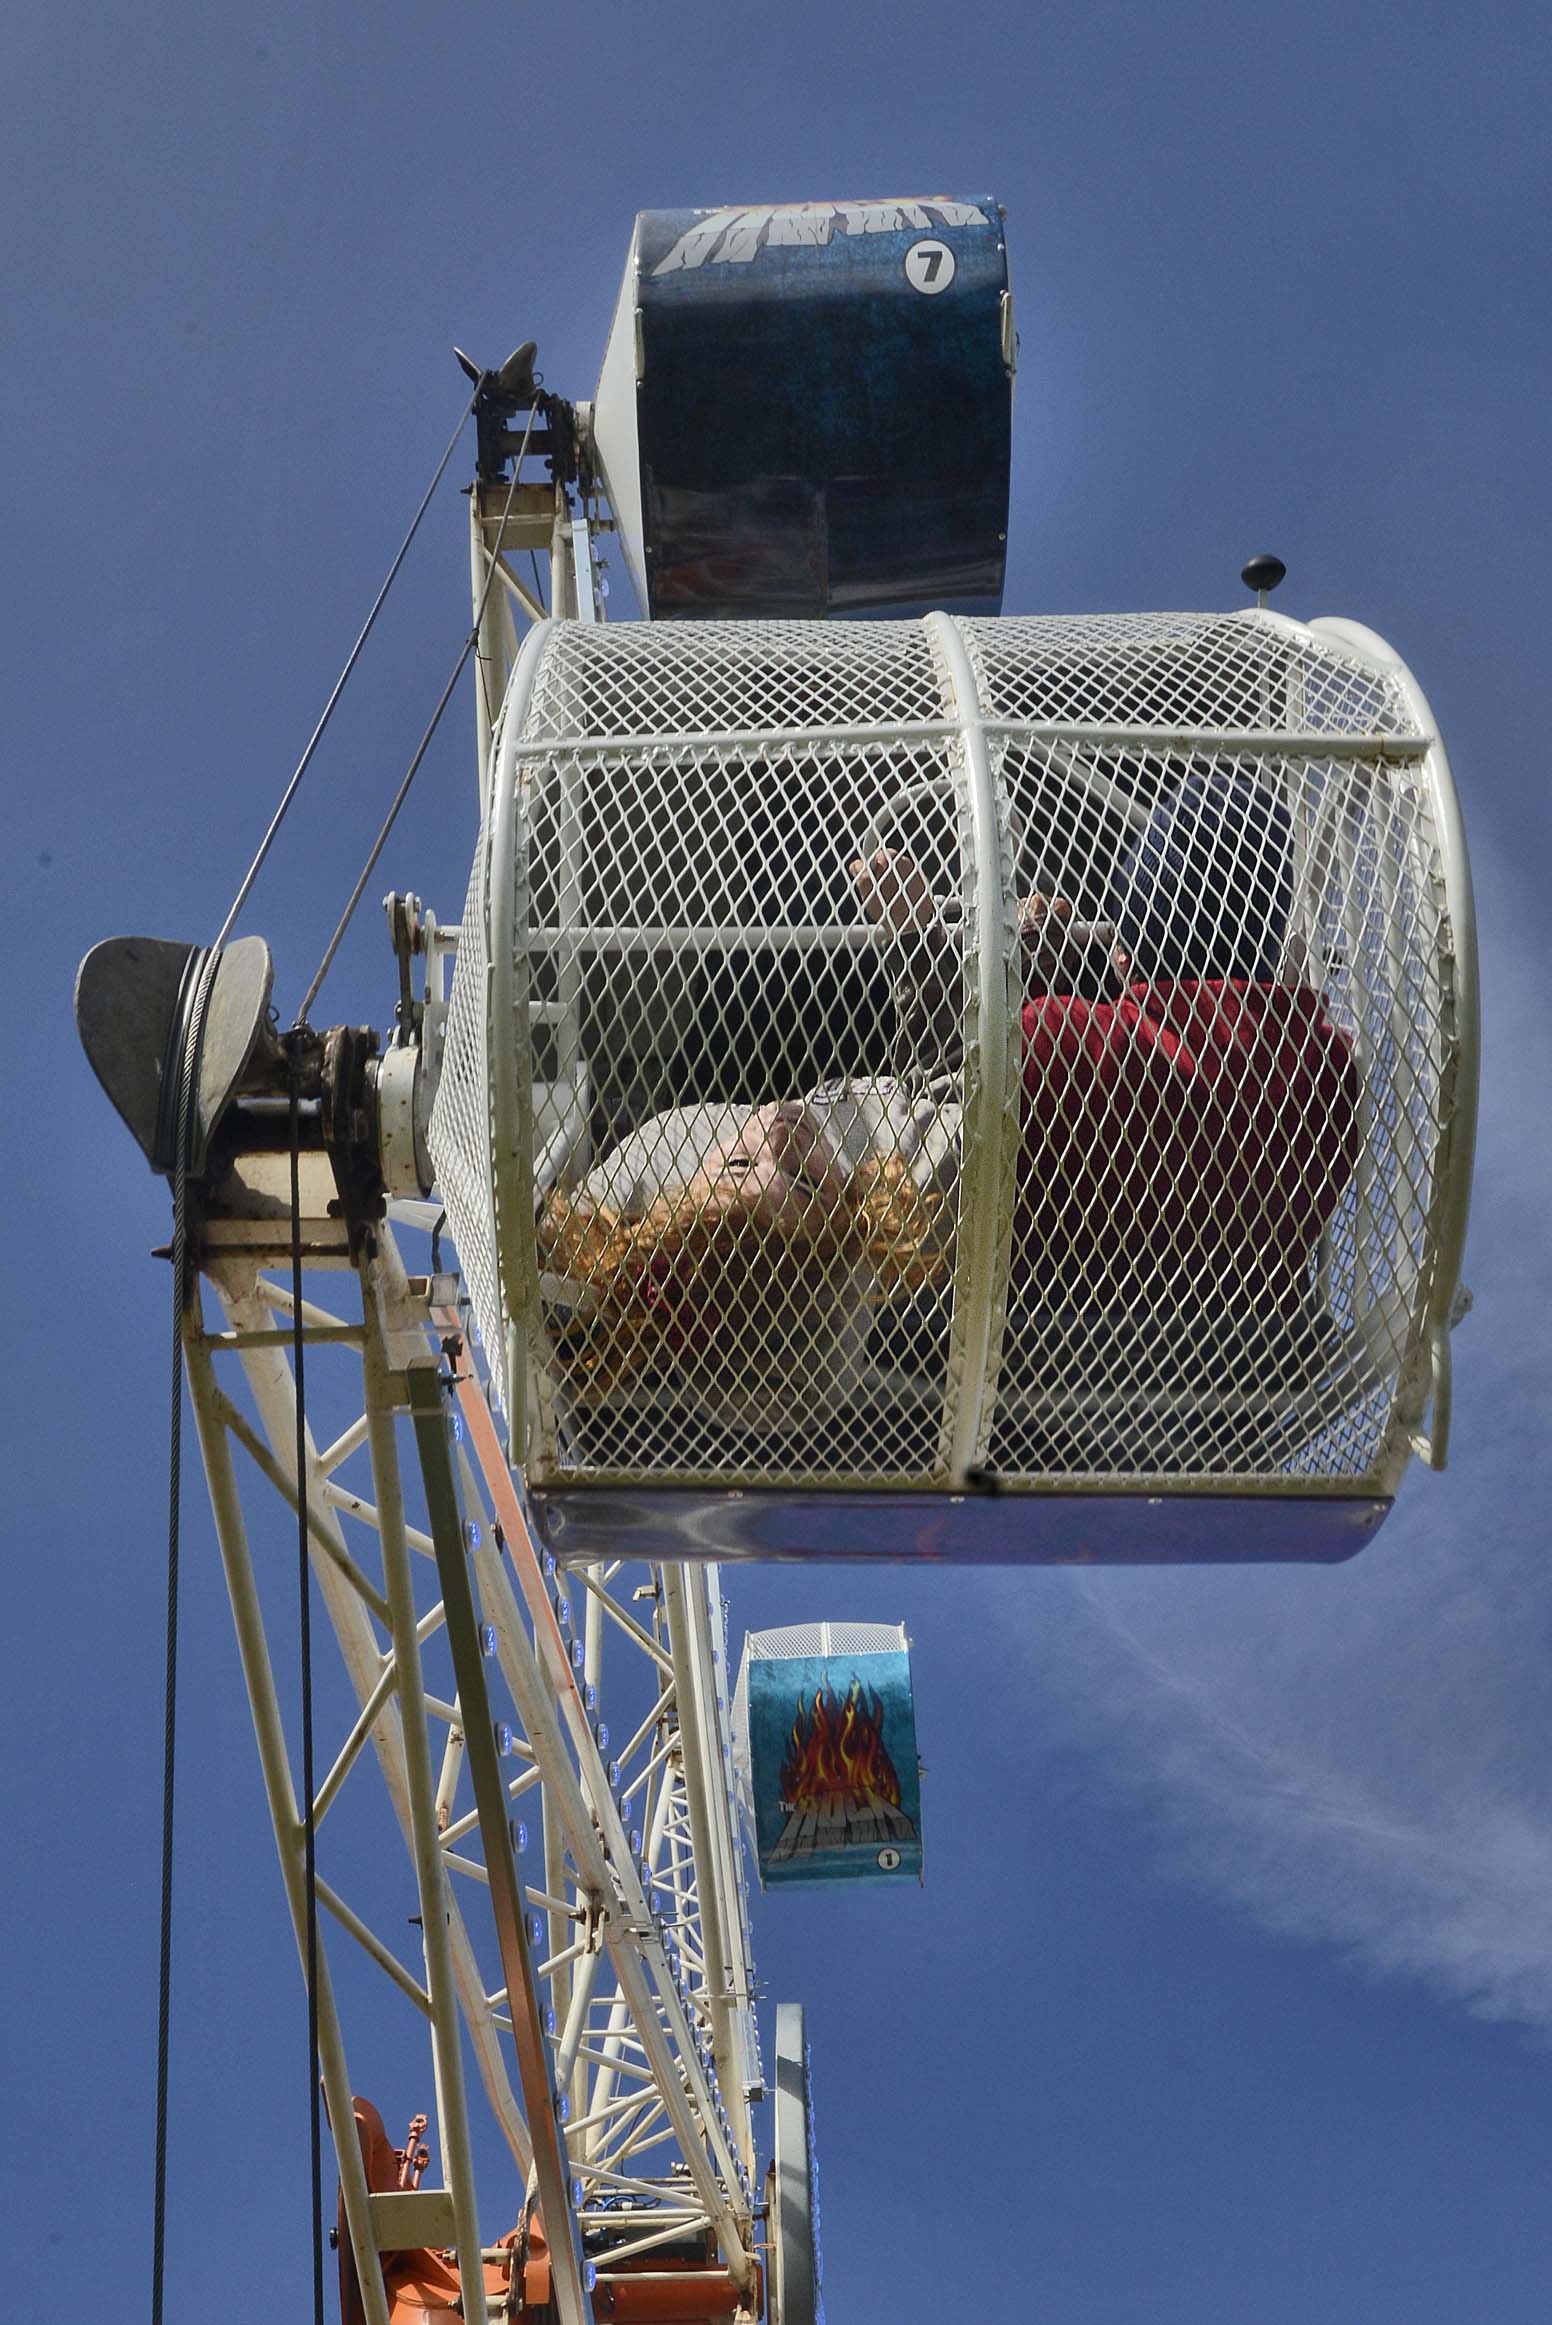 The Rock ferris wheel allows riders to spin inside of their cage as the wheel turns during the Golden Wheel Amusements carnival in Kenai, Alaska.